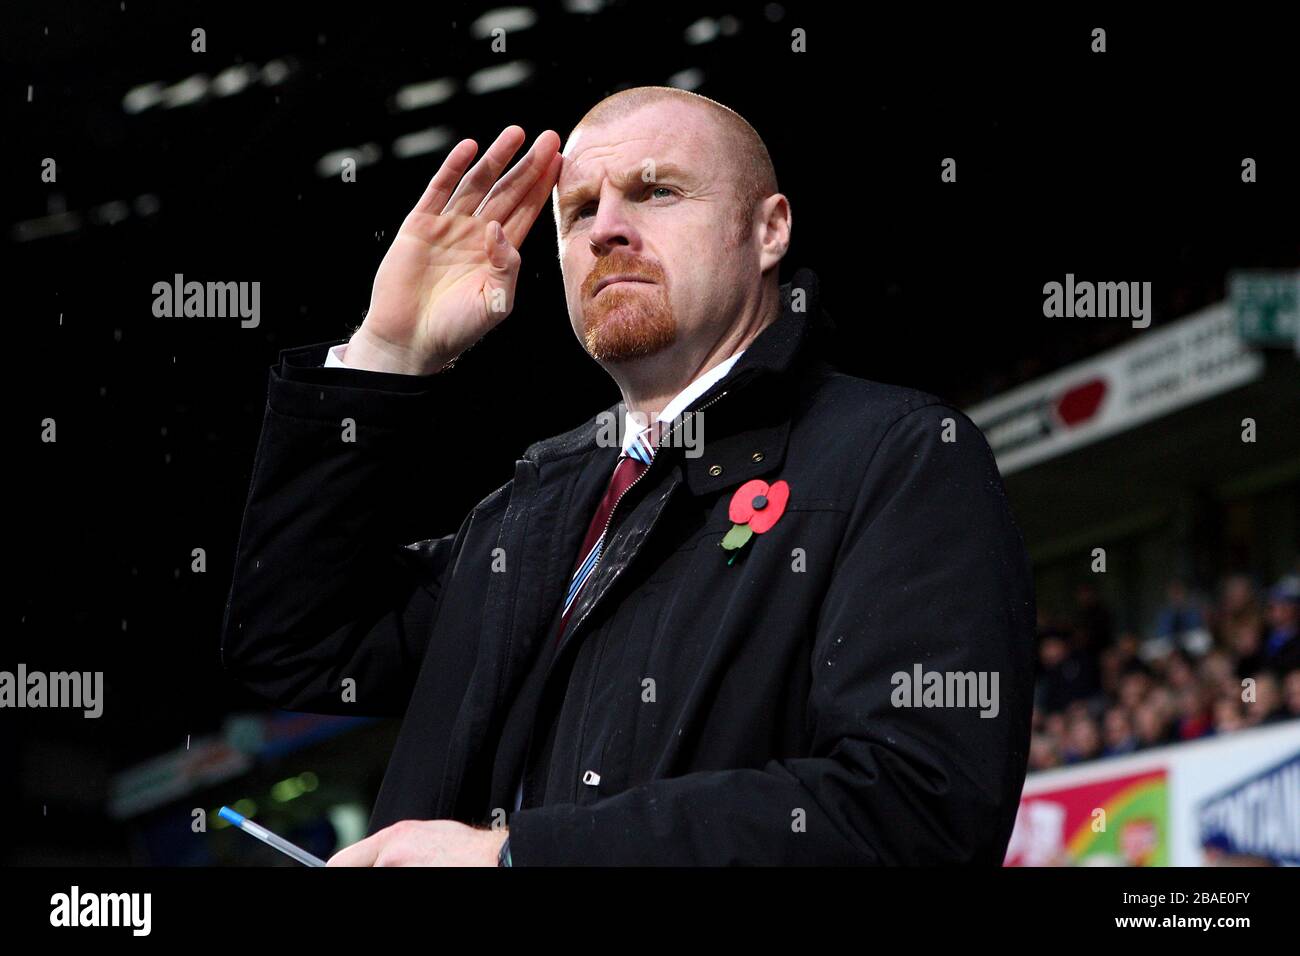 Burnley's manager Sean Dyche salutes the crowd as he takes his place on the touchline Stock Photo